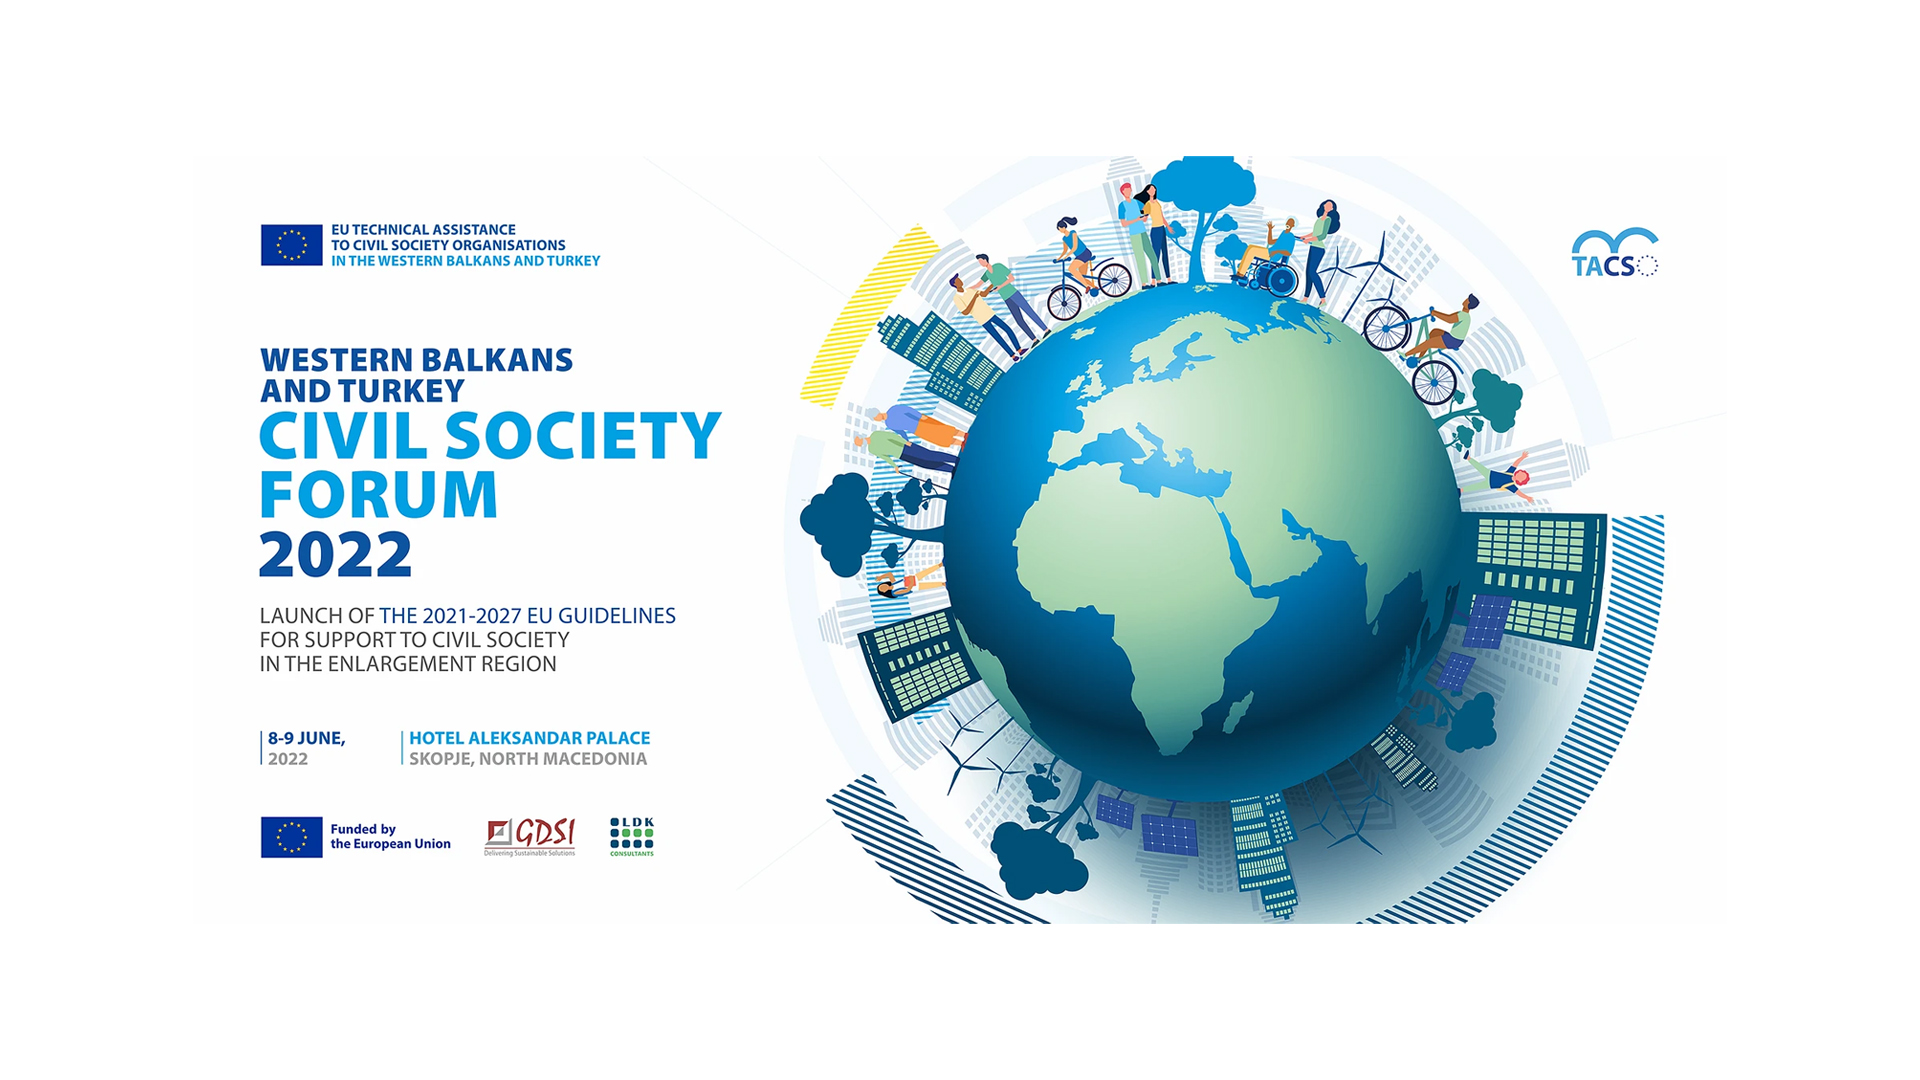 Civil Society Forum 2022 – OPEN CALL FOR CSOs IN ROLE OF CONTRIBUTORS AND PARTICIPANTS – Deadline: Monday, 30 May 2022 at 17:00hrs (Brussels time)